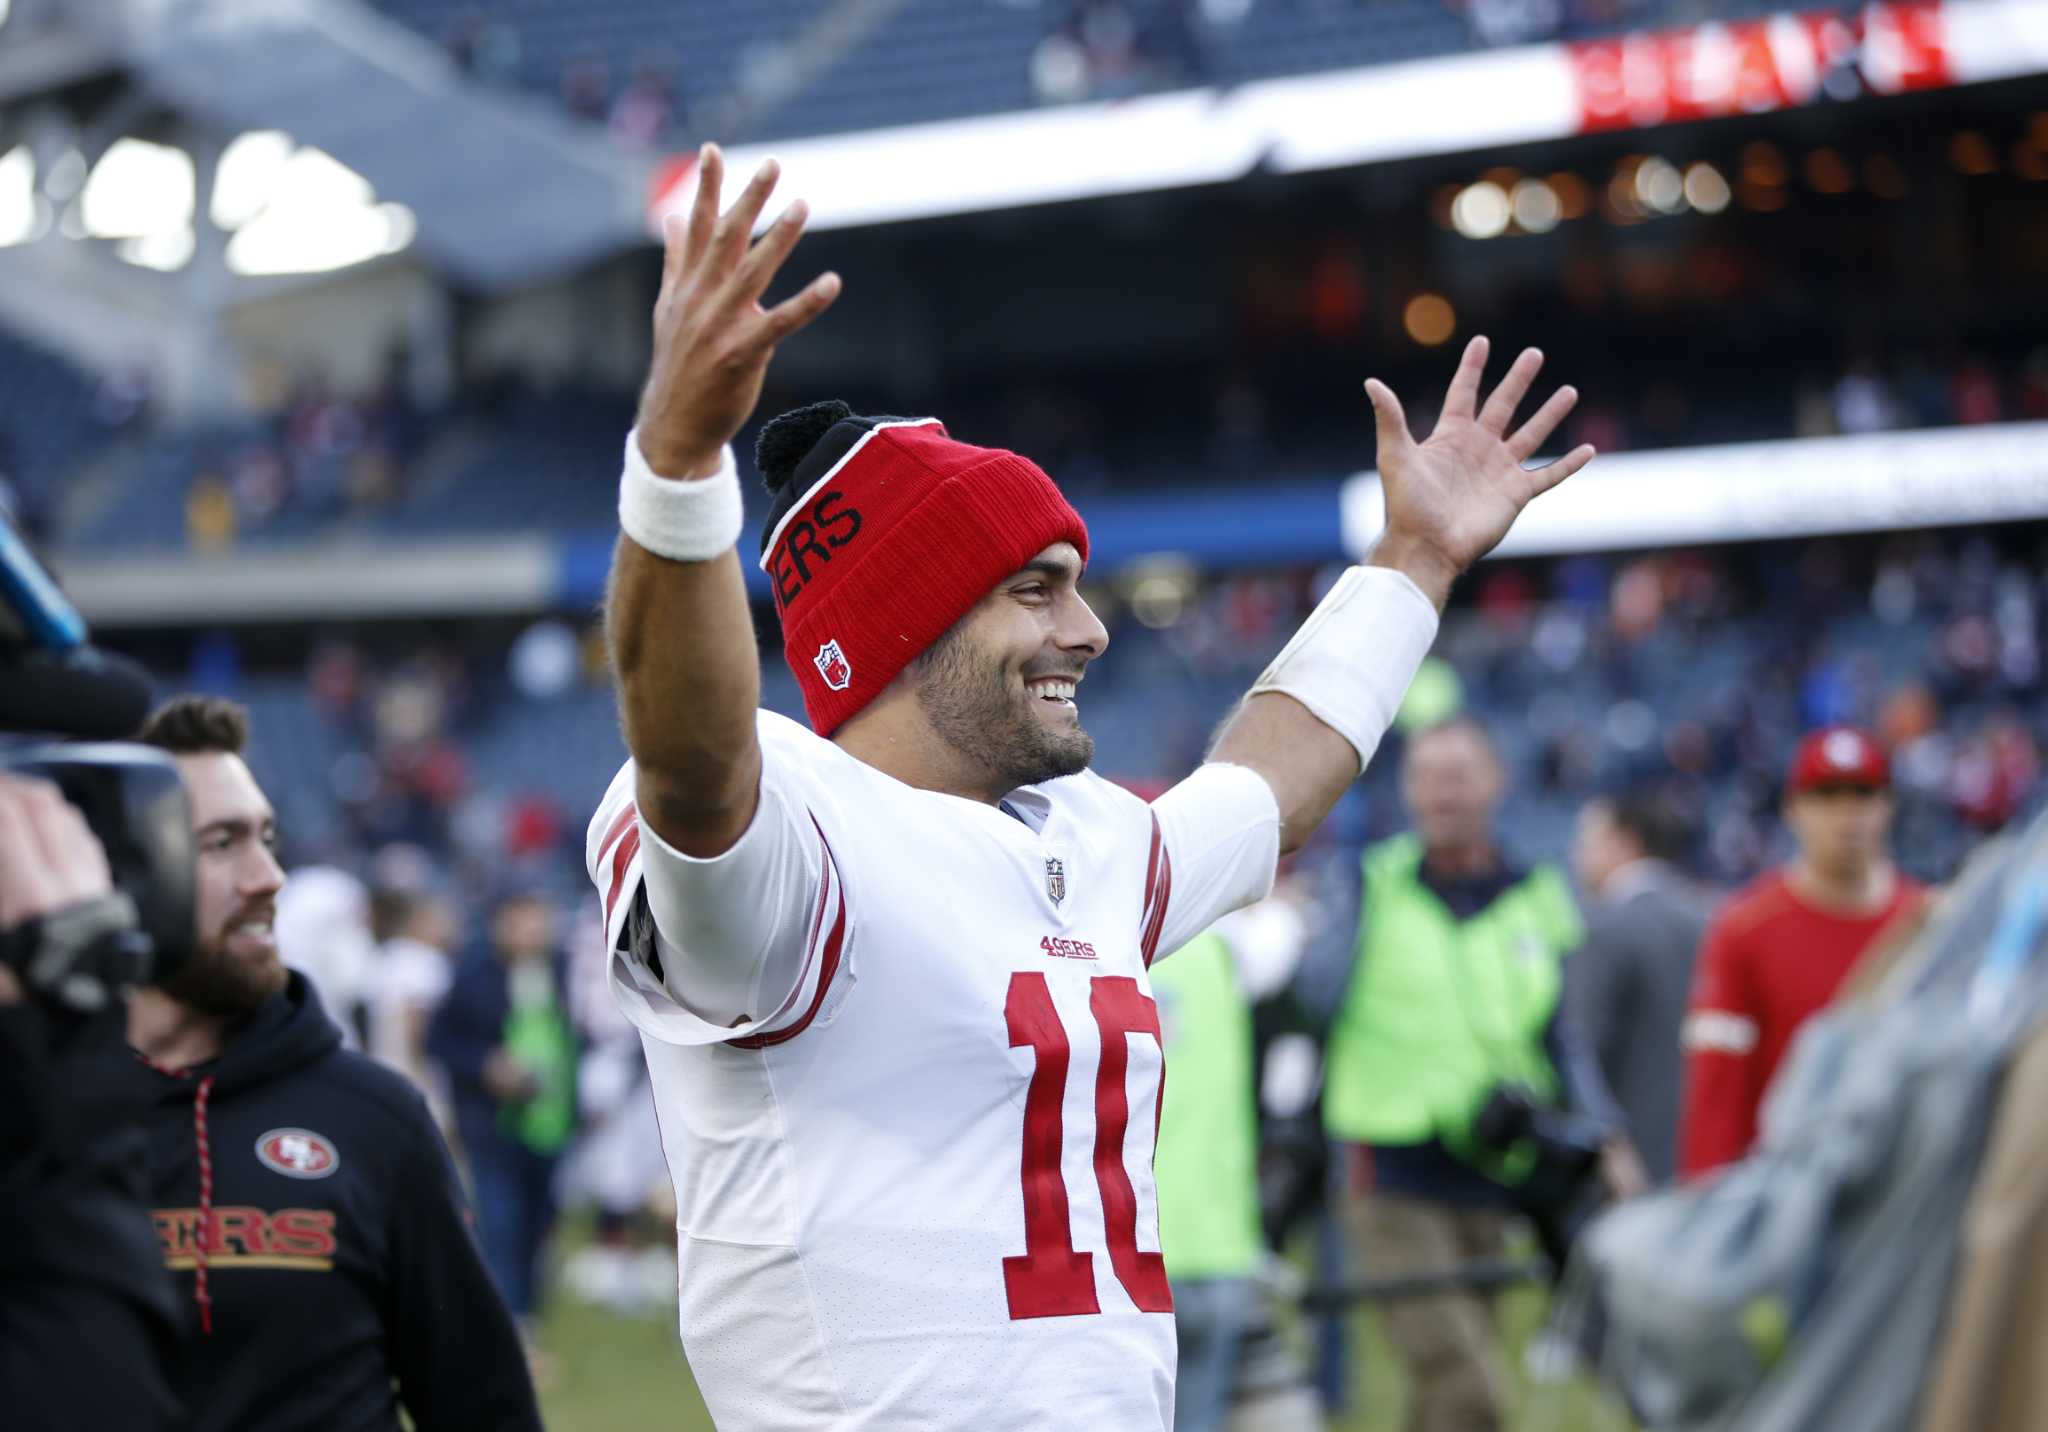 Covering 49ers QB Jimmy Garoppolo: The most memorable moments